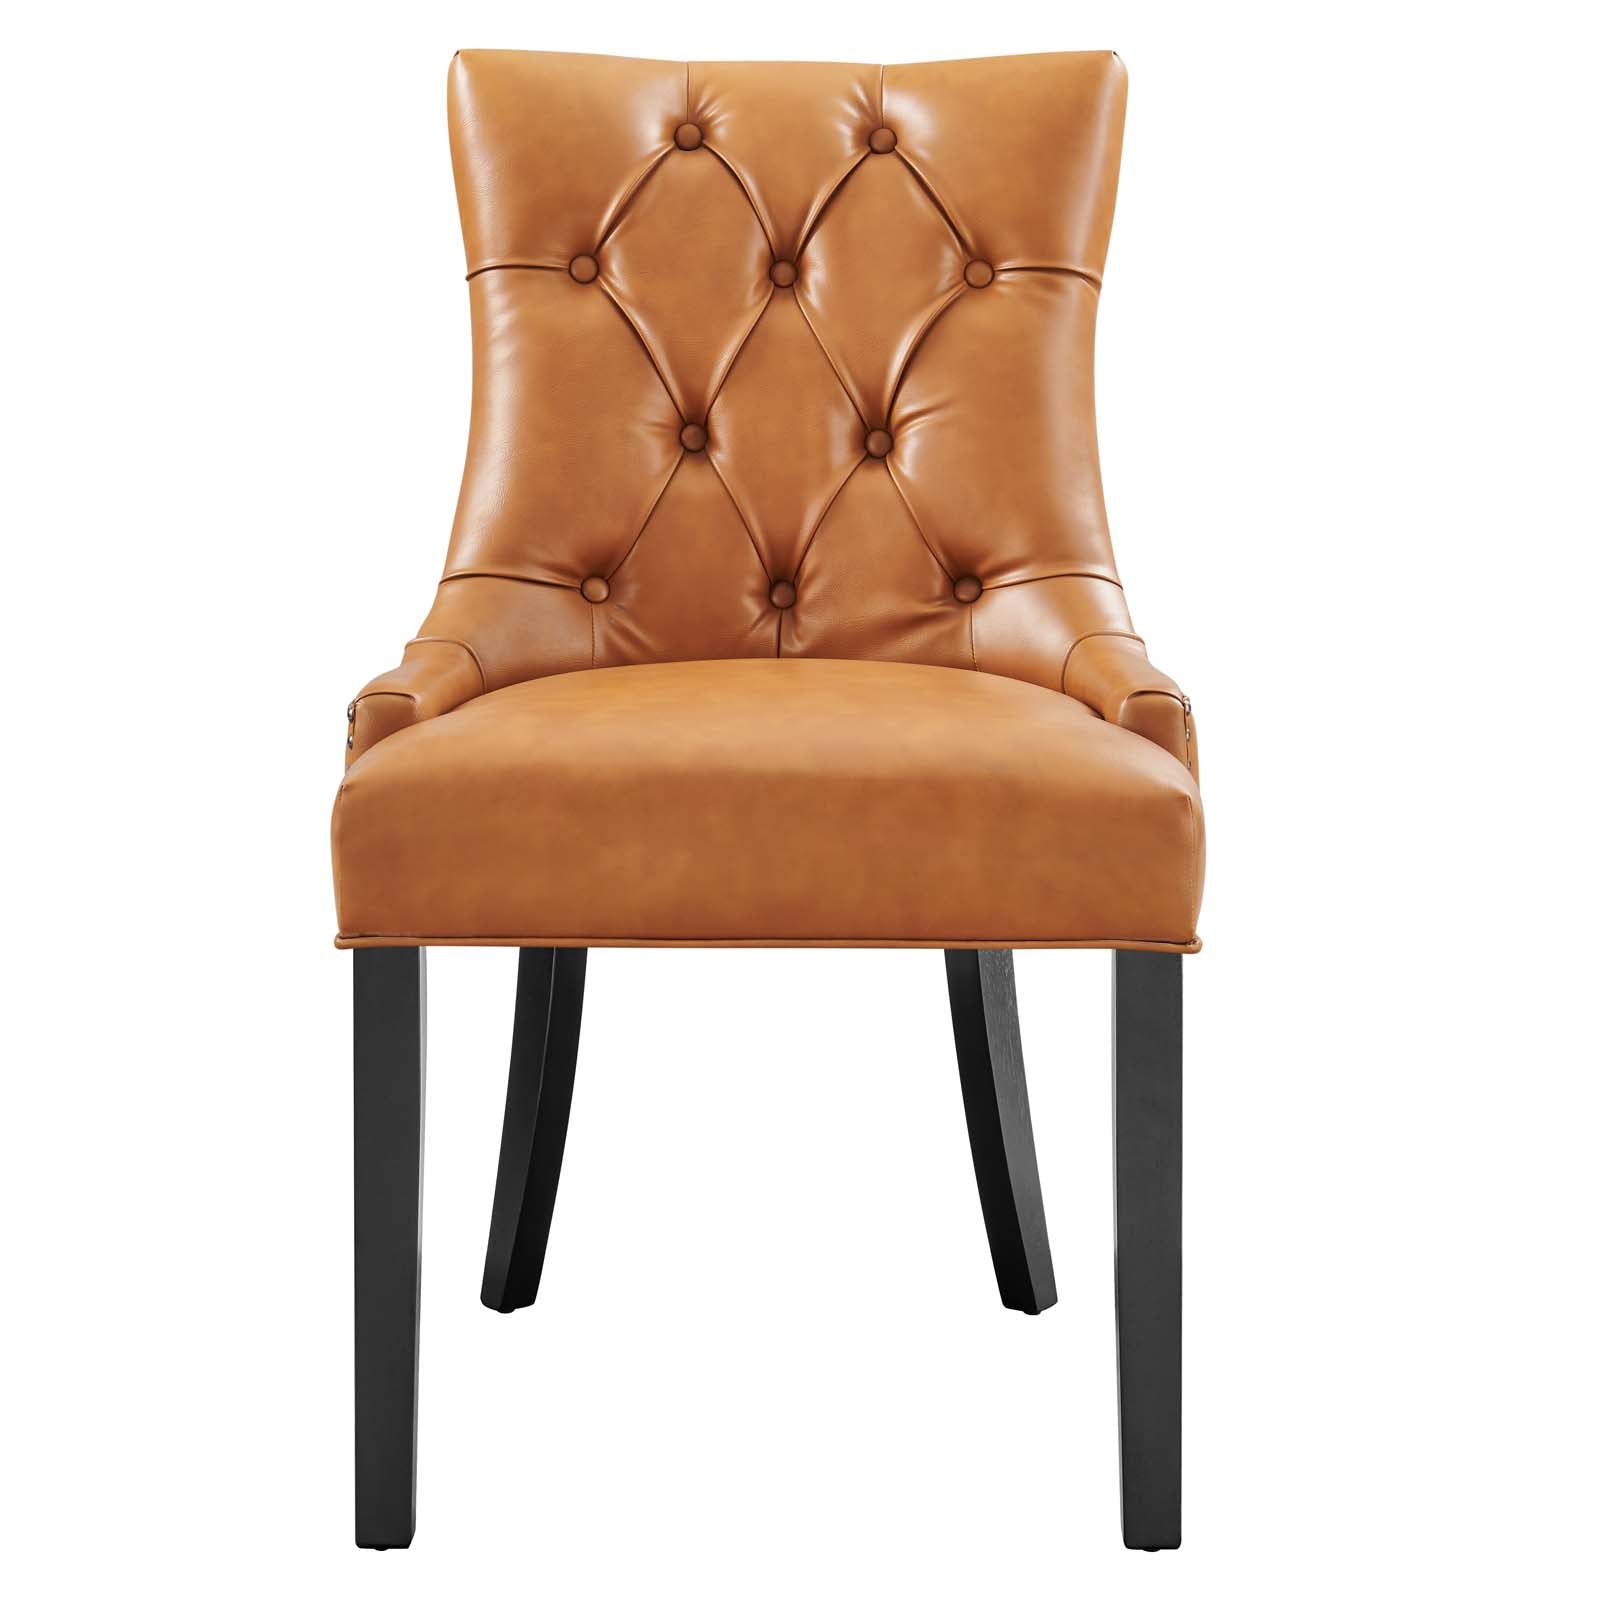 Regent Tufted Vegan Leather Dining Chair - East Shore Modern Home Furnishings